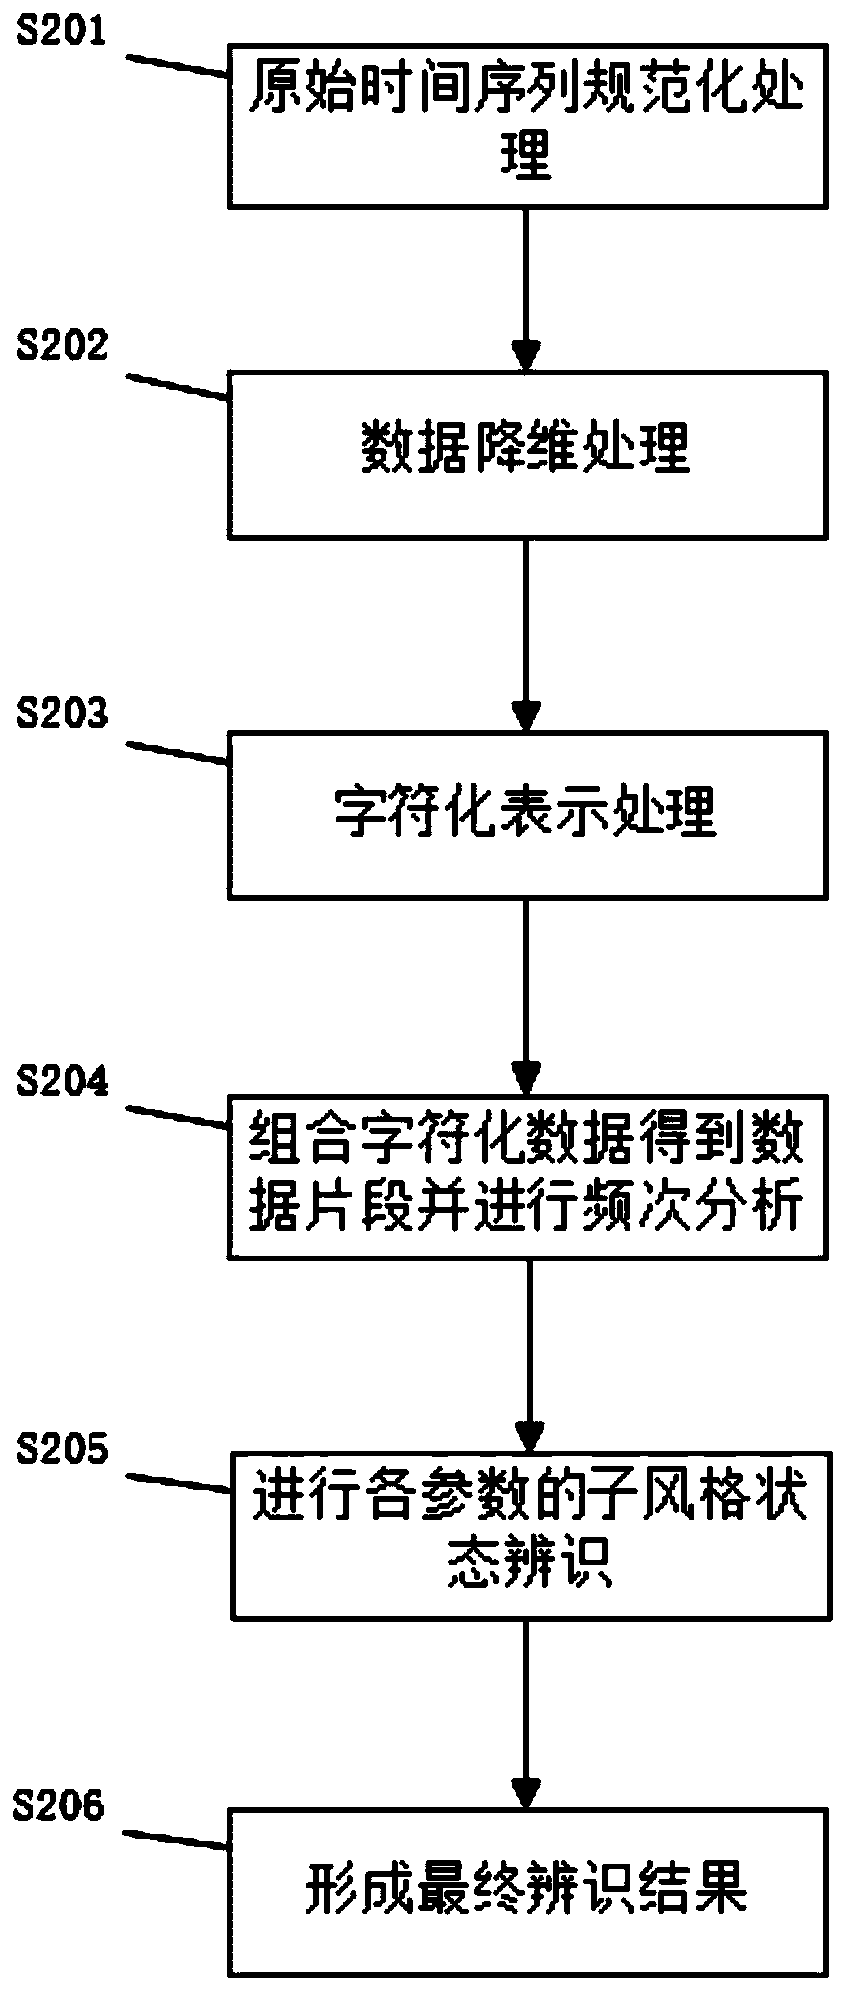 Driving style and state identification method based on vehicle controller local area network data information